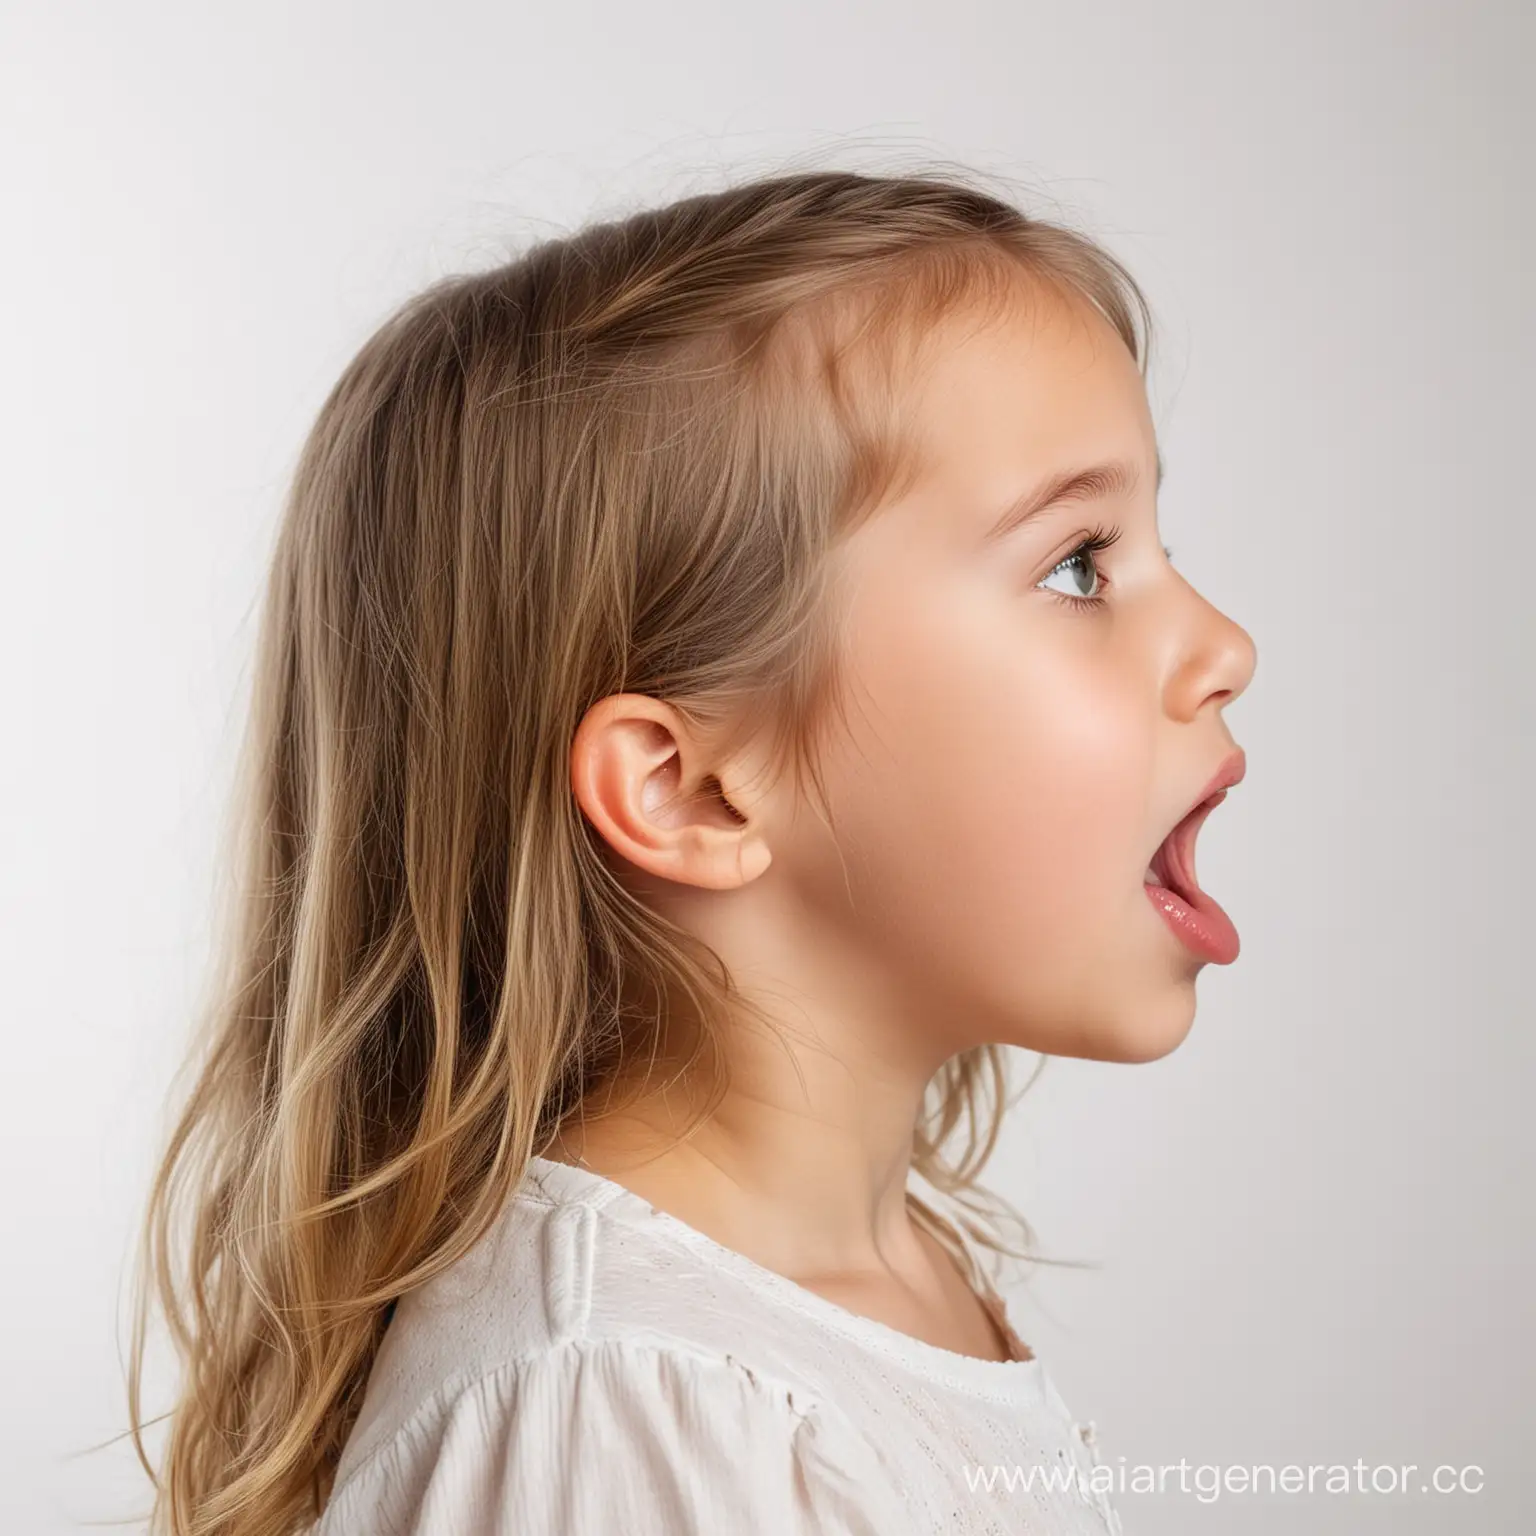 Young-Girl-Expressing-Joy-in-Profile-Against-White-Background